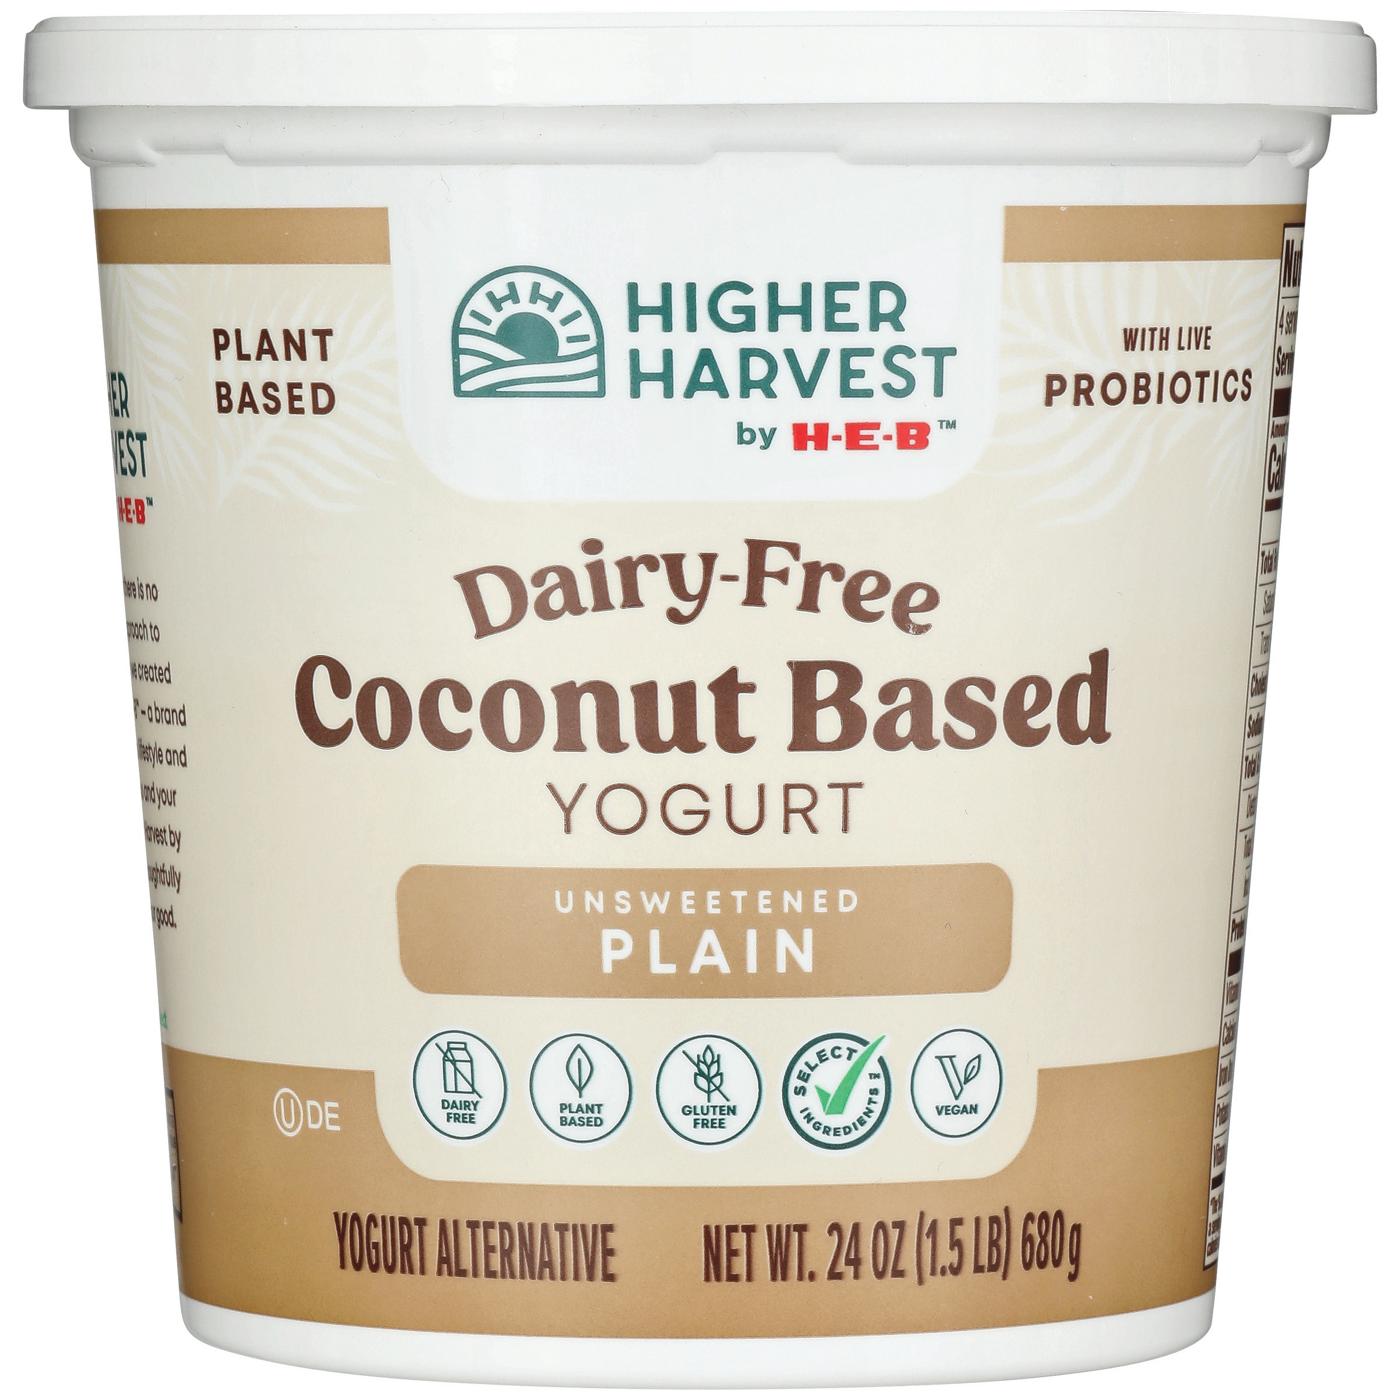 Higher Harvest by H-E-B Dairy-Free Coconut-Based Yogurt – Unsweetened Plain; image 1 of 2